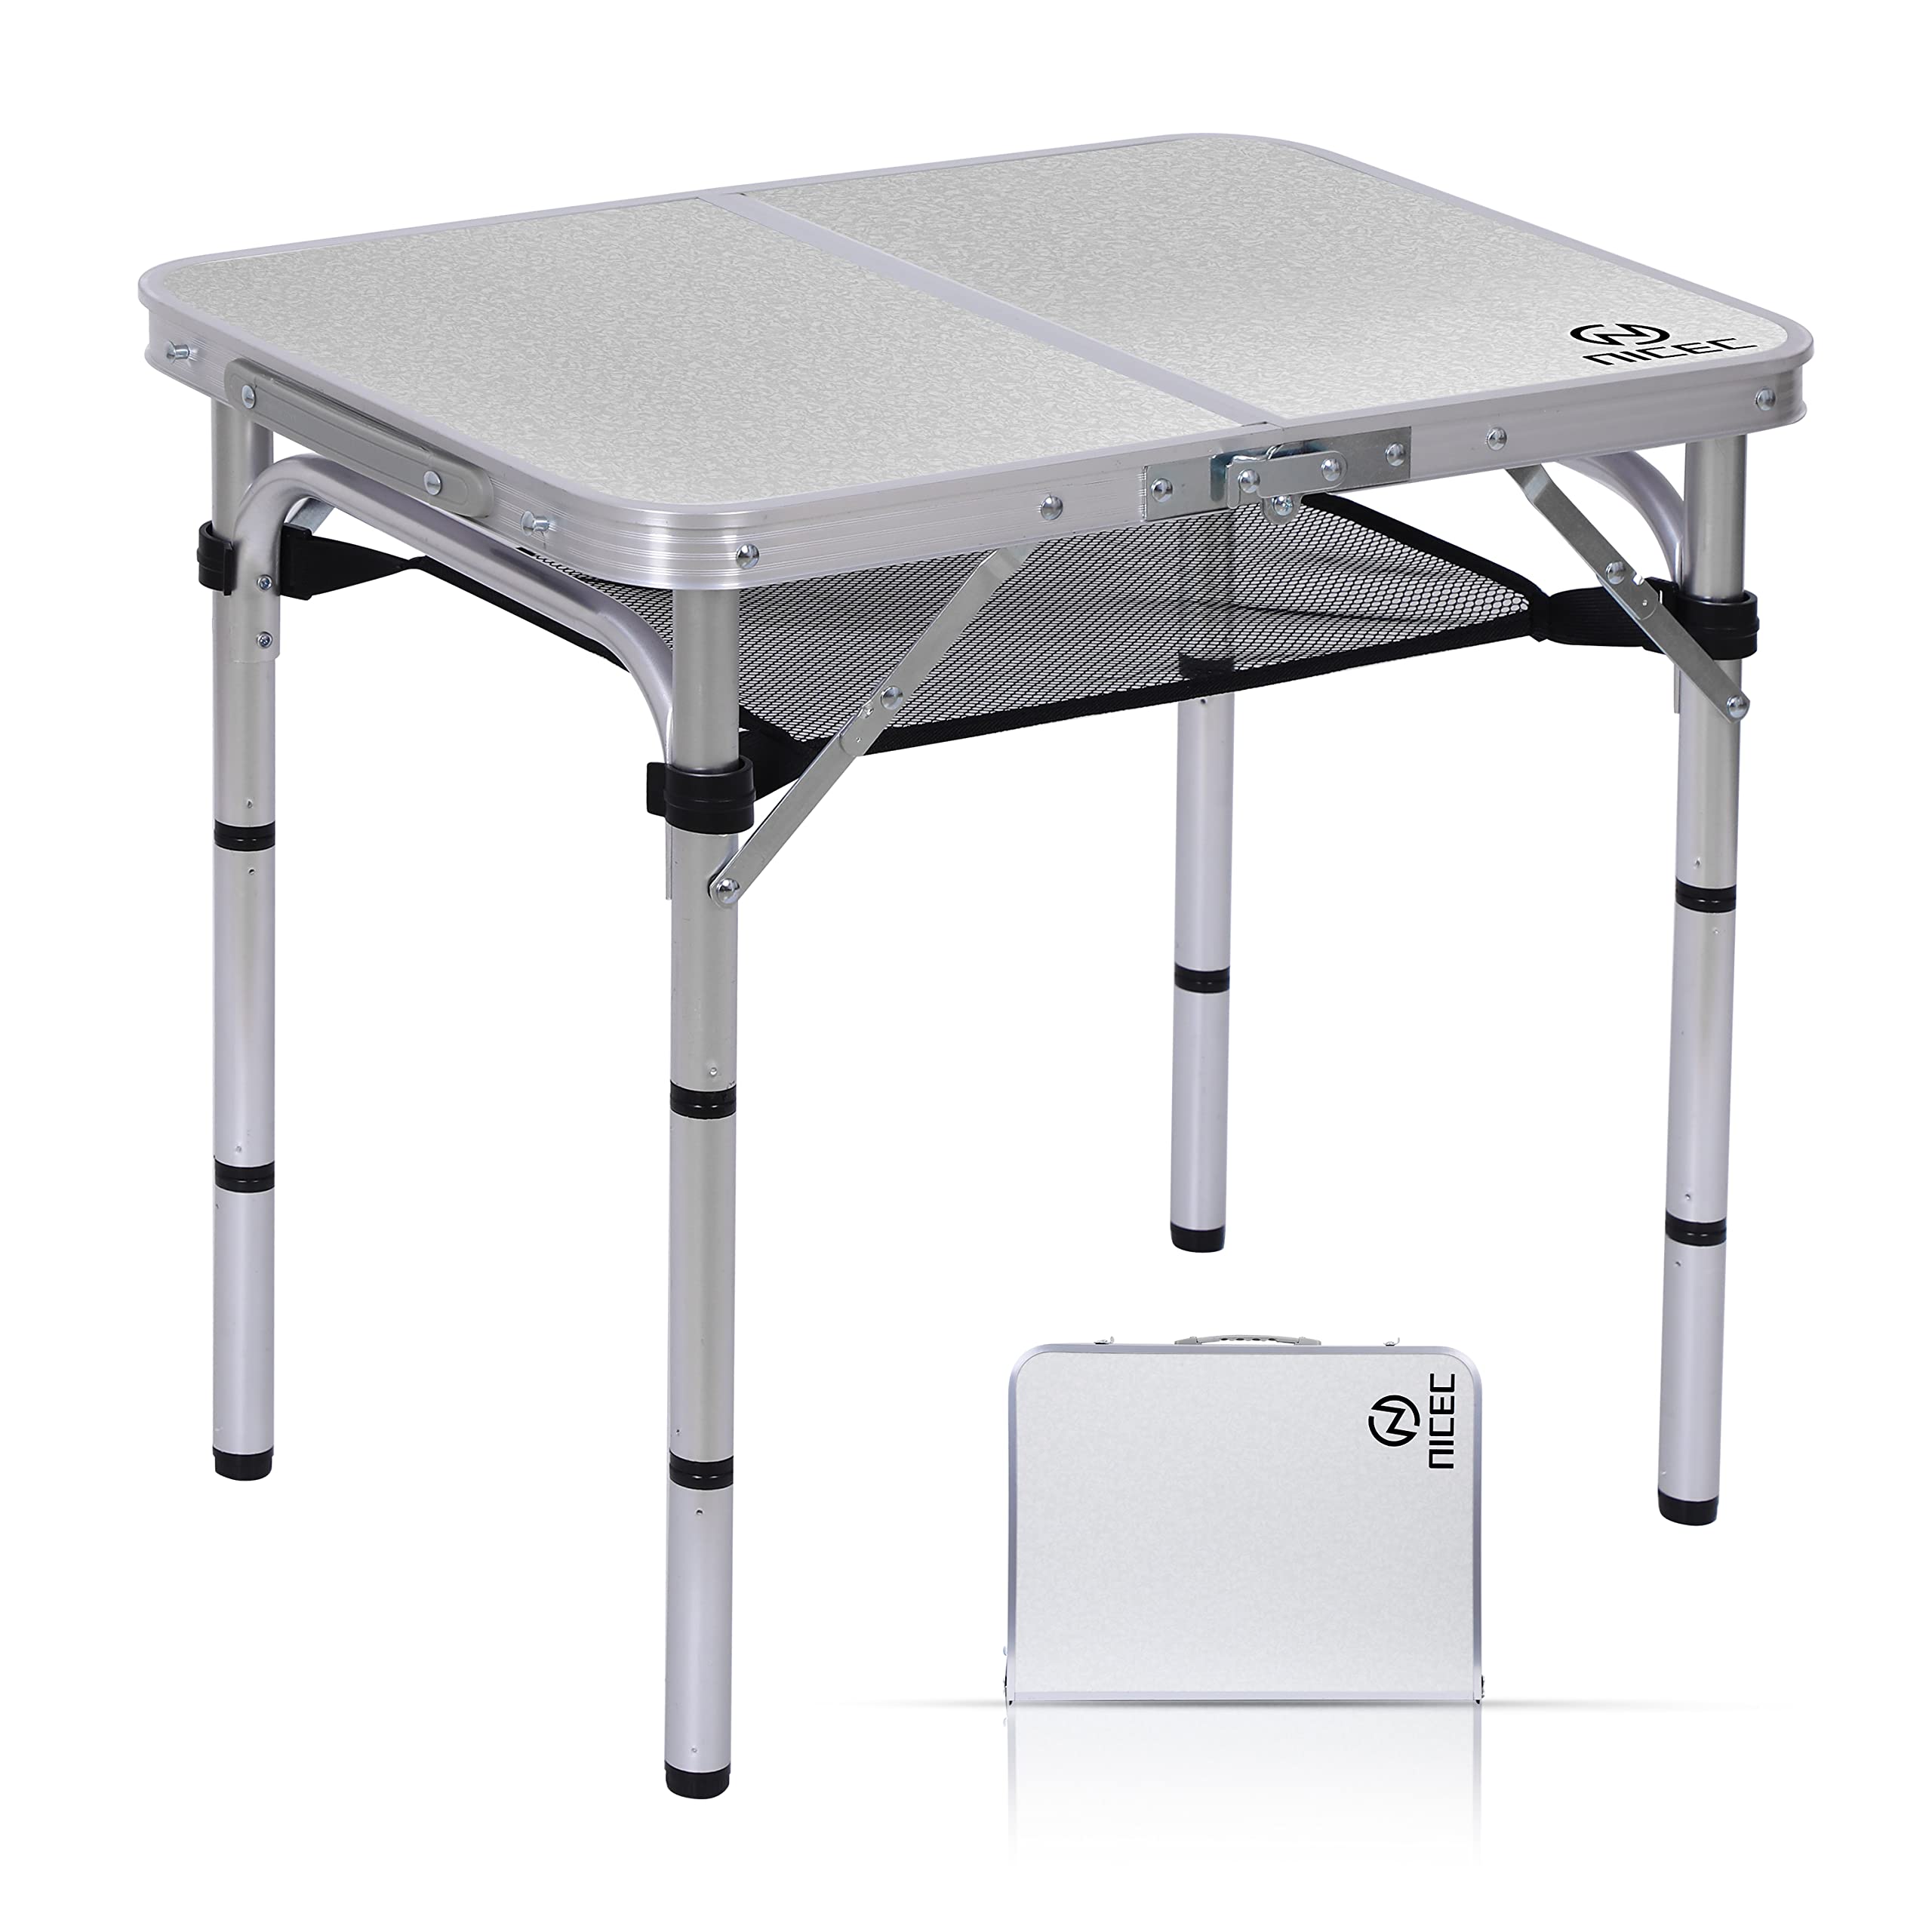 Nice C Card Table, Folding Picnic Table, Small Table, Adjustable Height Folding Table, Camping, Outdoor, Portable Lightweight Al